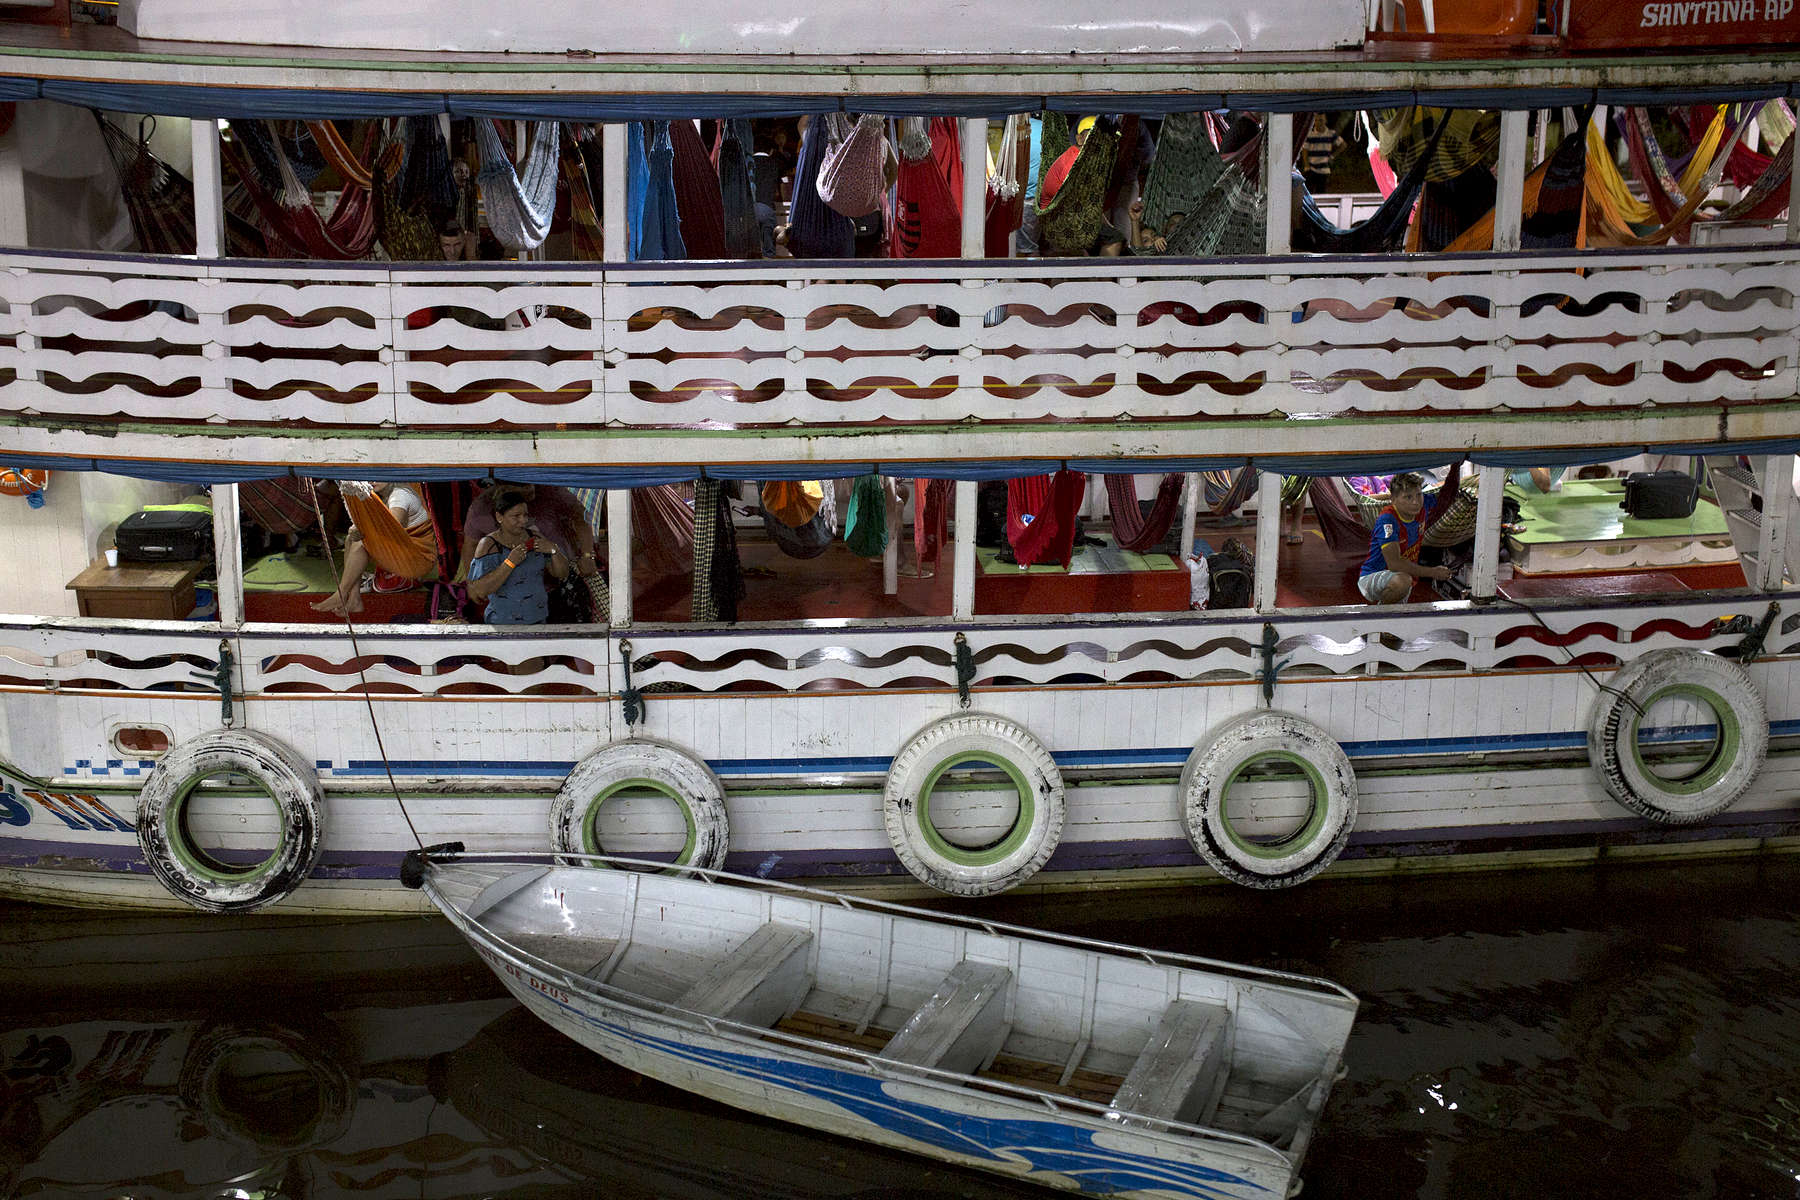 A similar boat to ours, parked at Macapá harbor. Some locals take cruises along the Amazon River for different celebrations. The boat includes hammocks to sleep on as well as a bar.